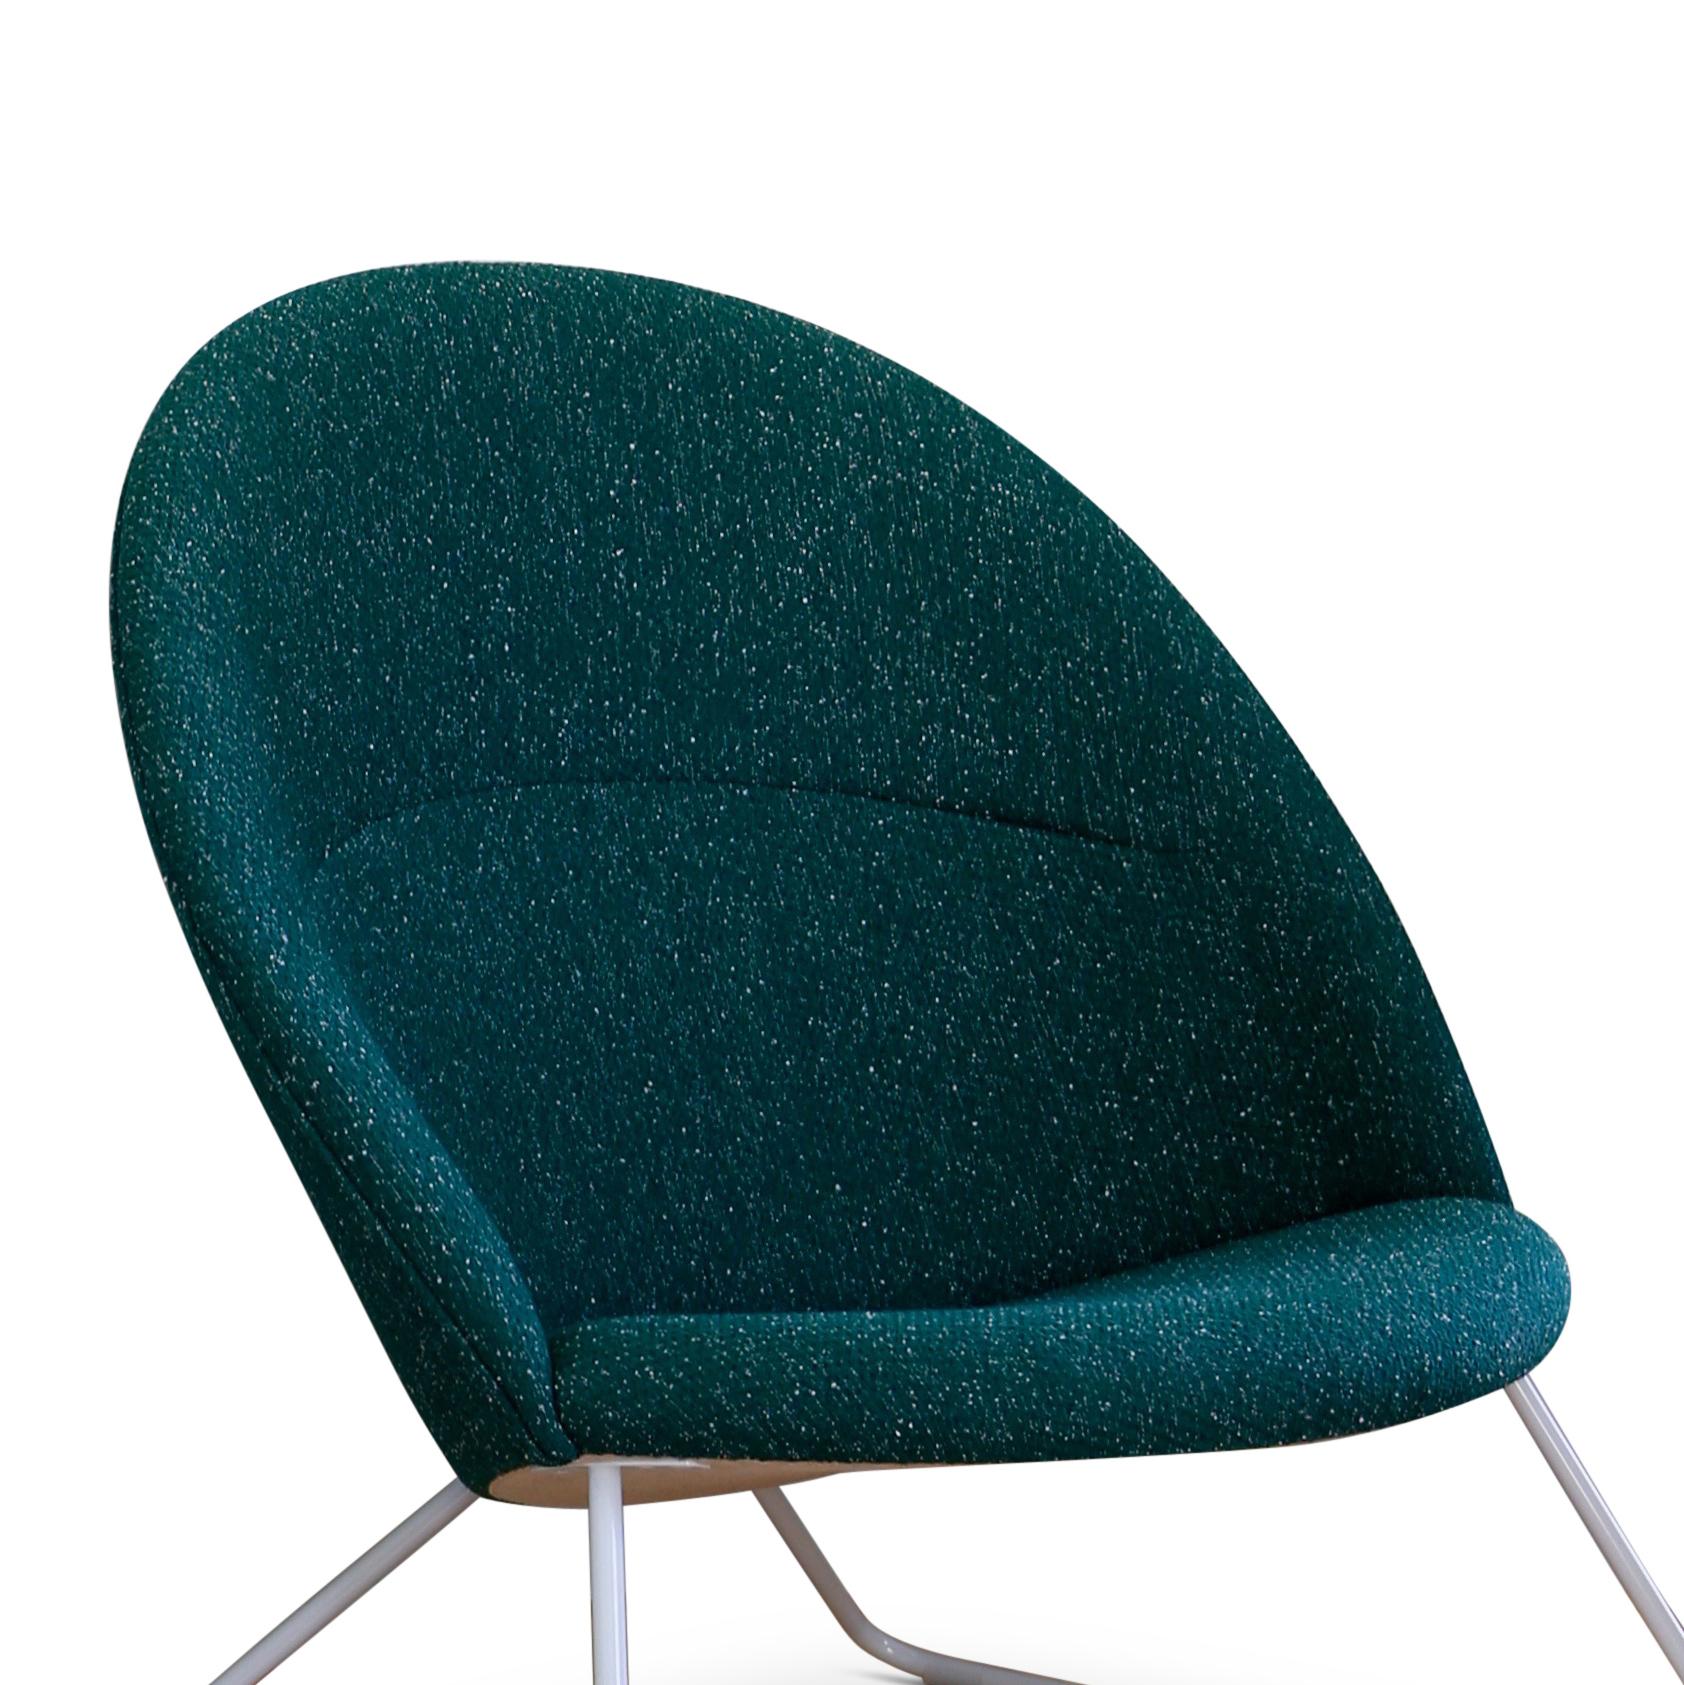 One collection has relaunched the easy chair, Dennie, which was designed by Nanna and Jørgen Ditzel in 1956 for Fritz Hansen. The Dennie chair is nicely complemented by a footstool and a small table.

Nanna Ditzel, who was one of the most